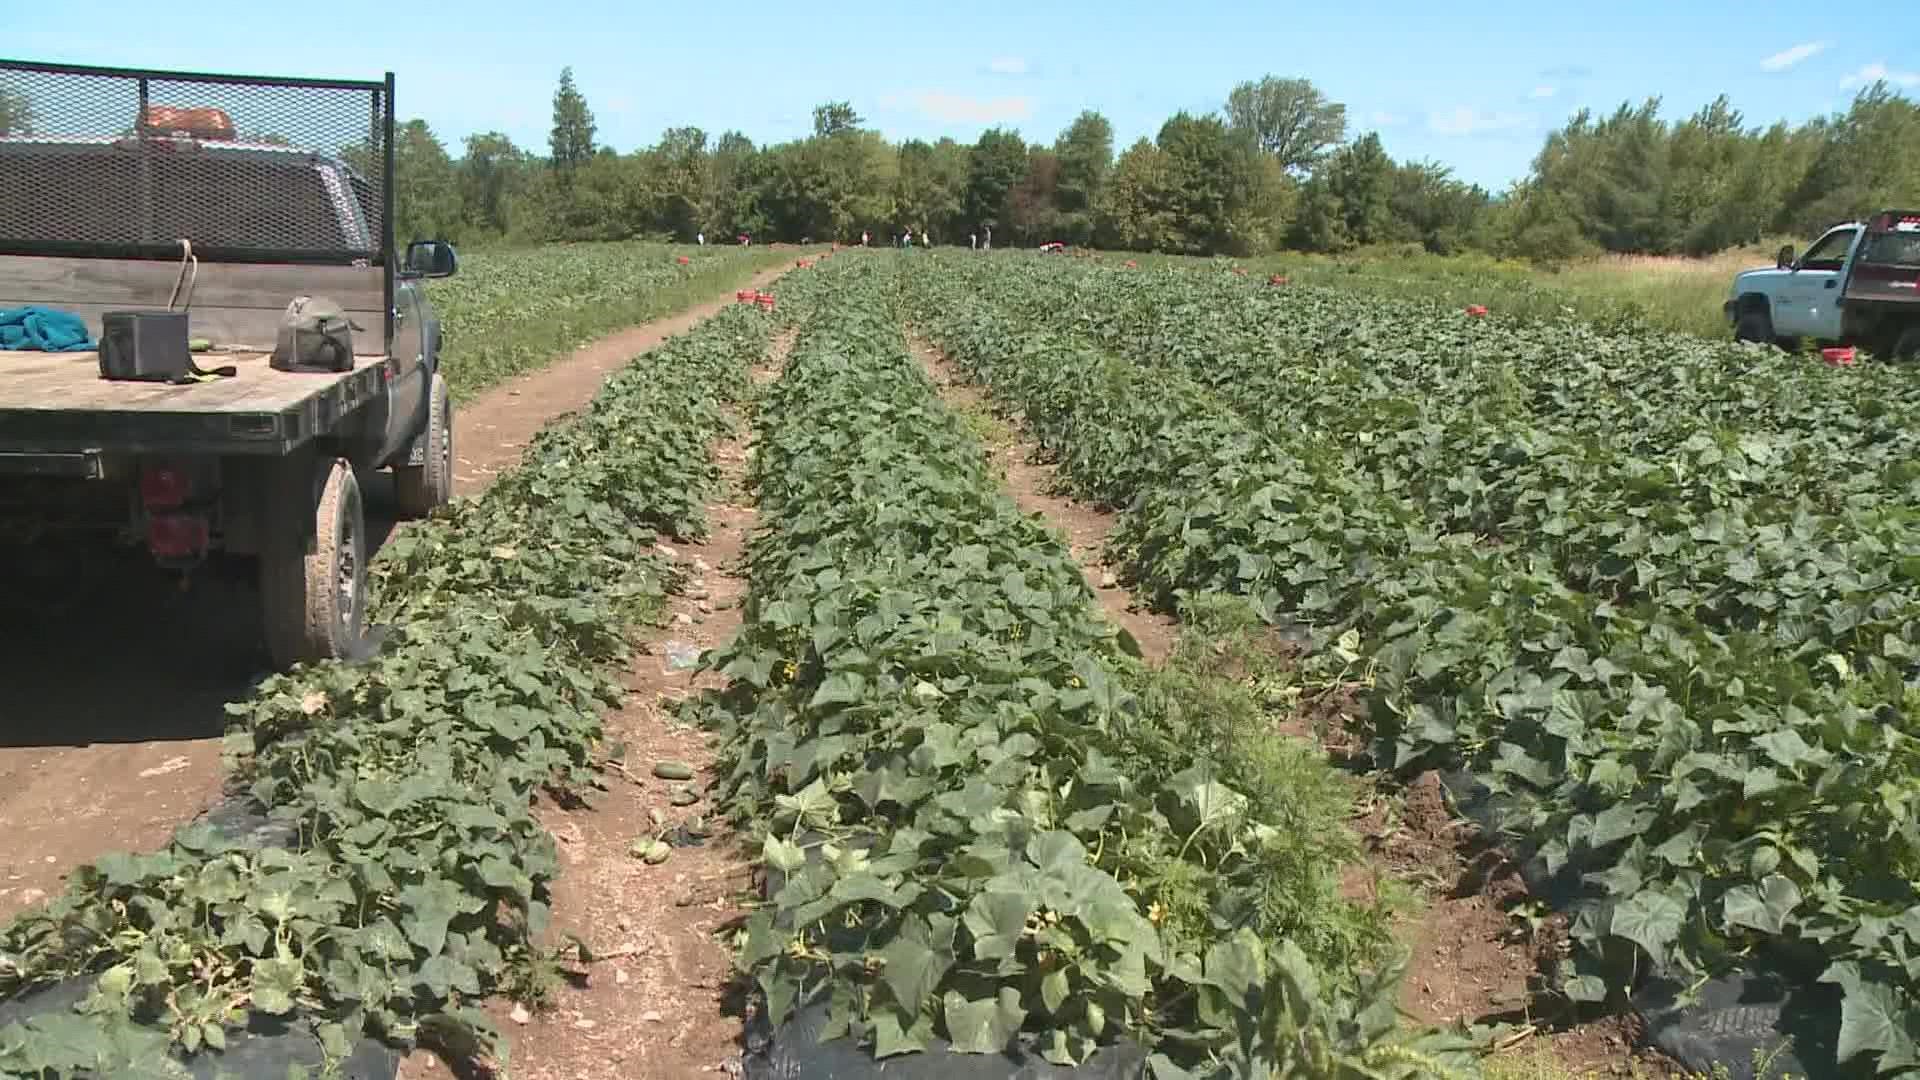 Farmers like Bob Spear of Spear Farms are turning to drip irrigation to replace natural rain during Maine's lengthy drought.